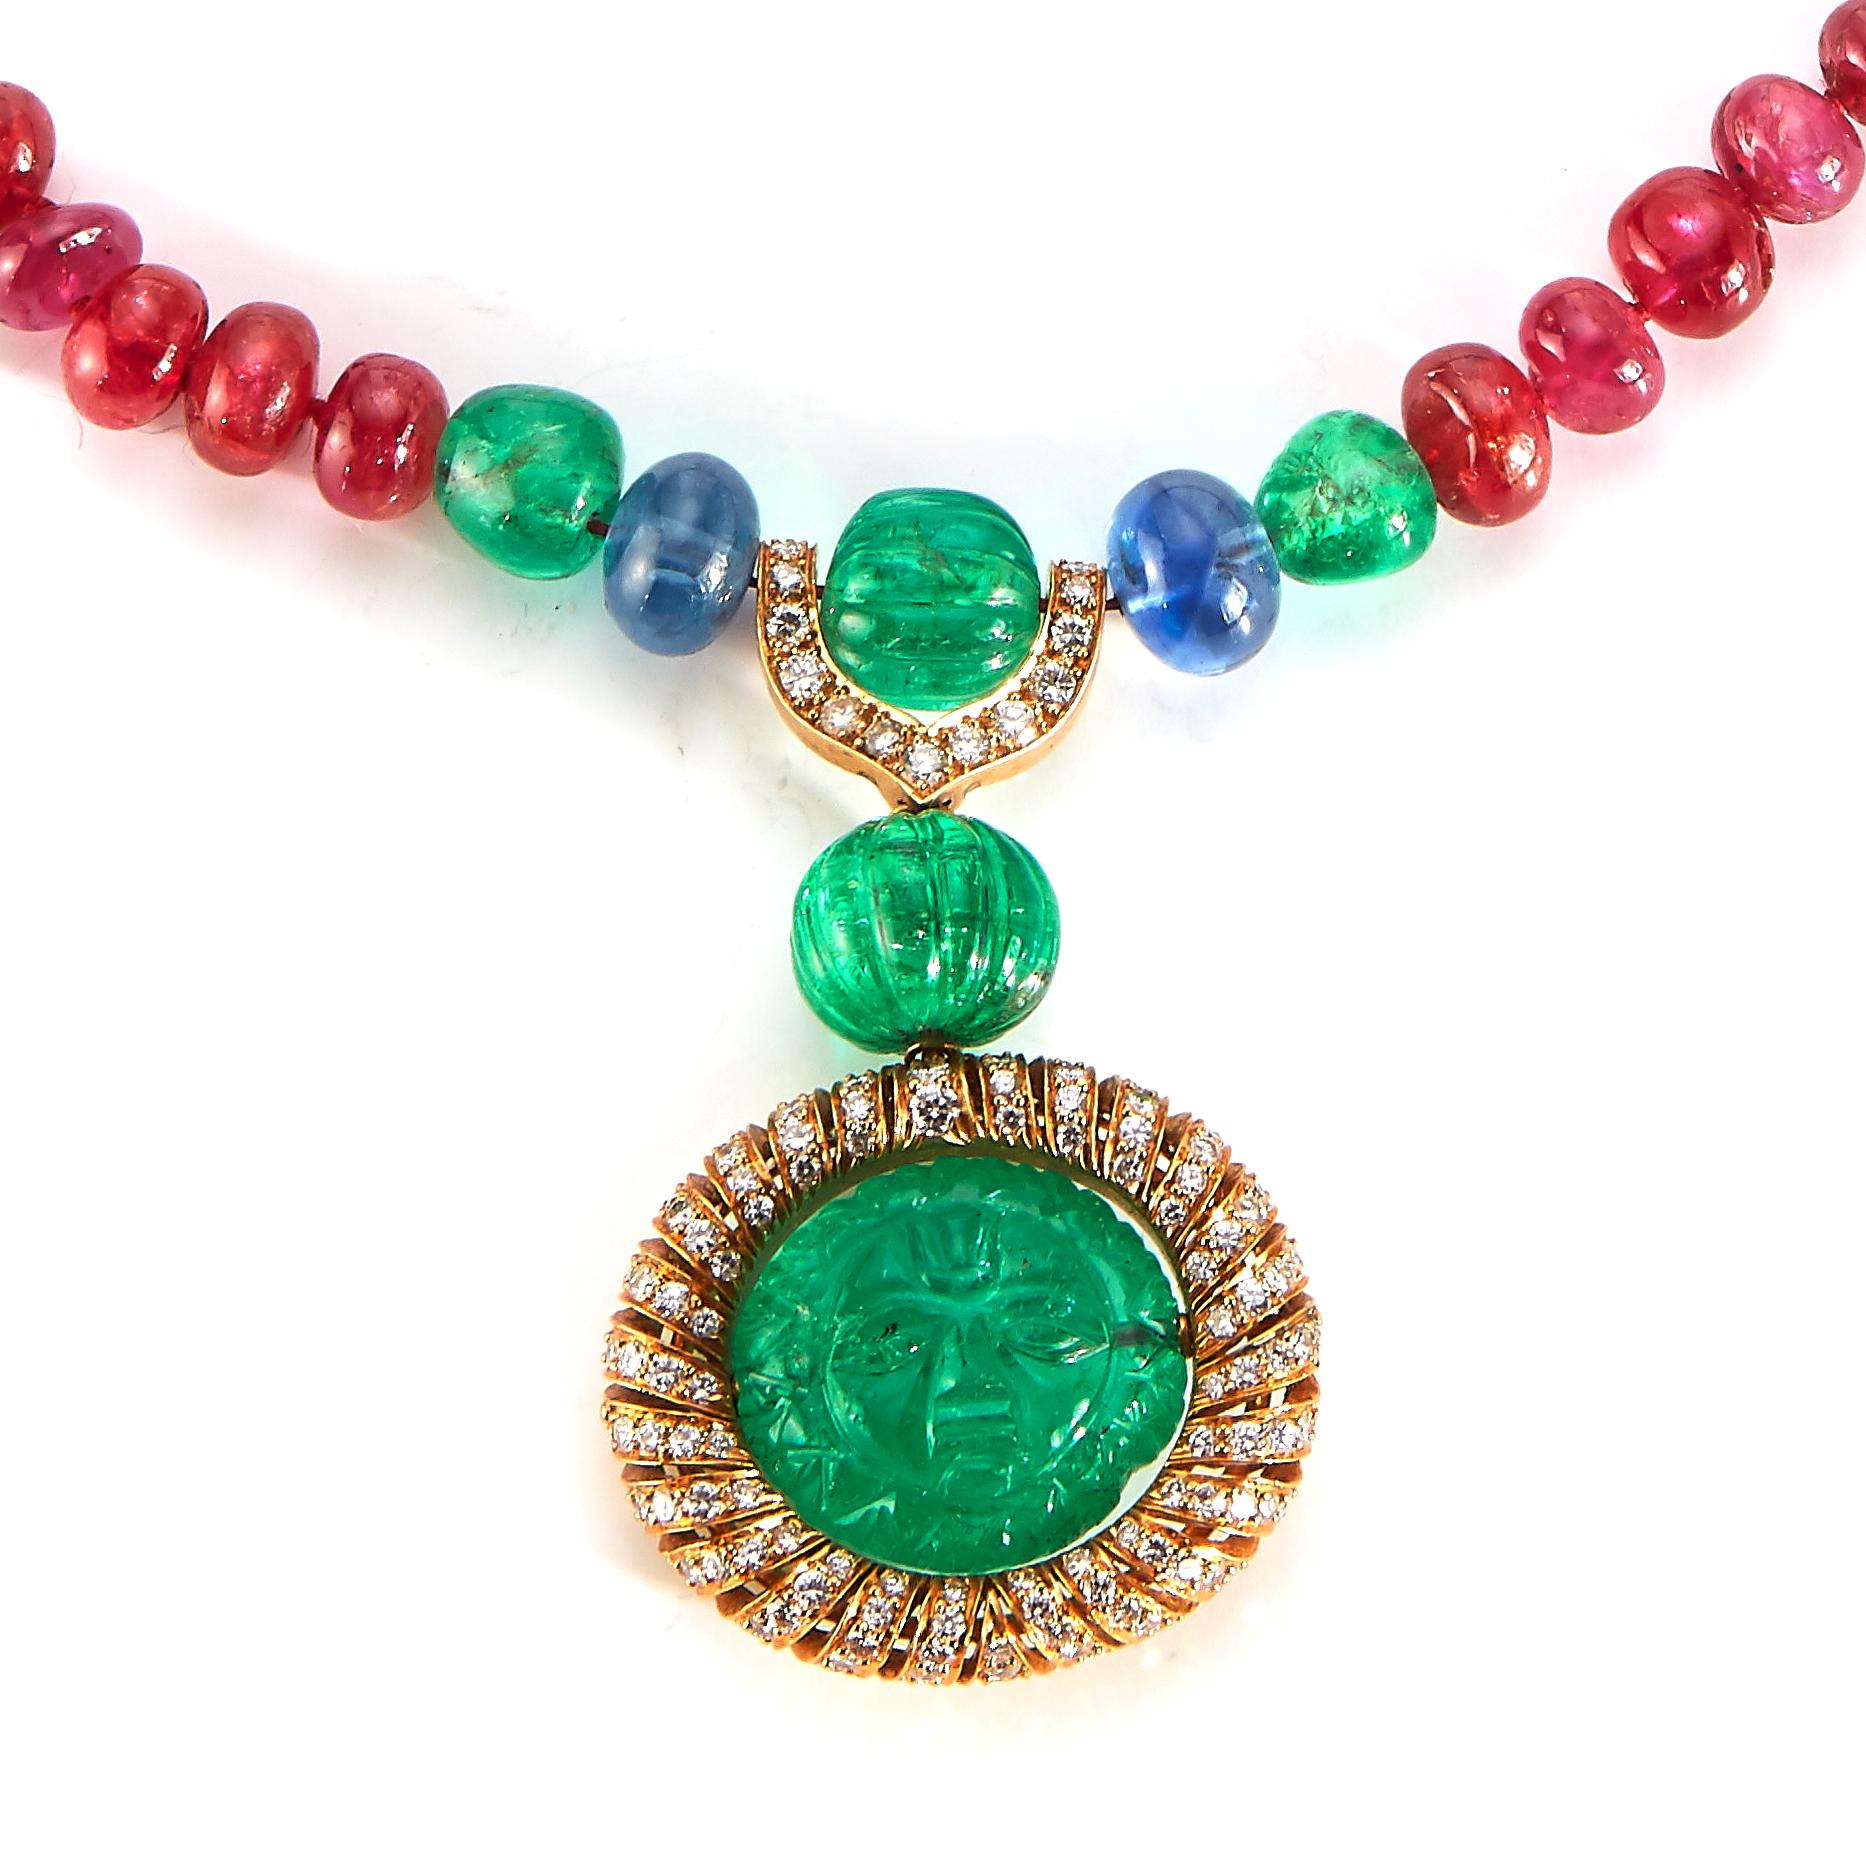 Estate Jewelry Curated by Parulina presents this magnificent Cartier Ruby and Emerald Necklace with Diamond and Blue Sapphires. Stunning detail to the center Emerald that is surrounded by approximately 2.50ct of Diamonds.
17 inches in length

Metal: